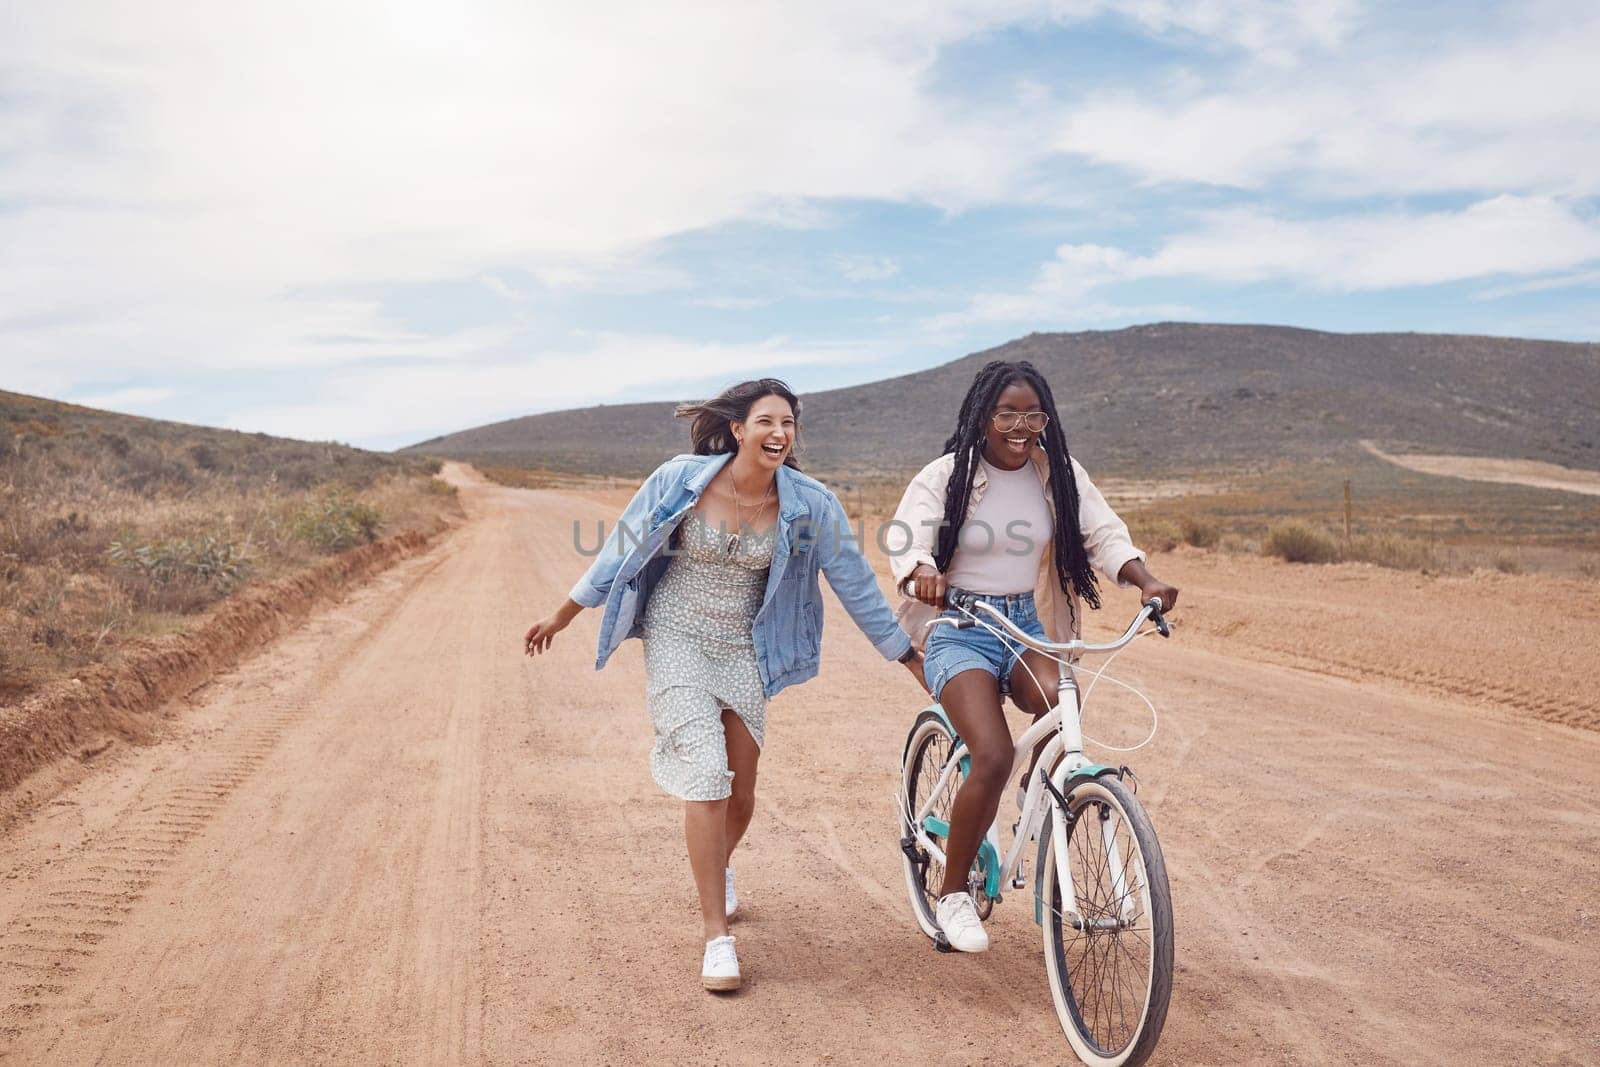 Bike ride, girl friends and road trip fun of women outdoor on a desert path on summer vacation. Cycling, running and freedom of young people together with bicycle transportation feeling free.